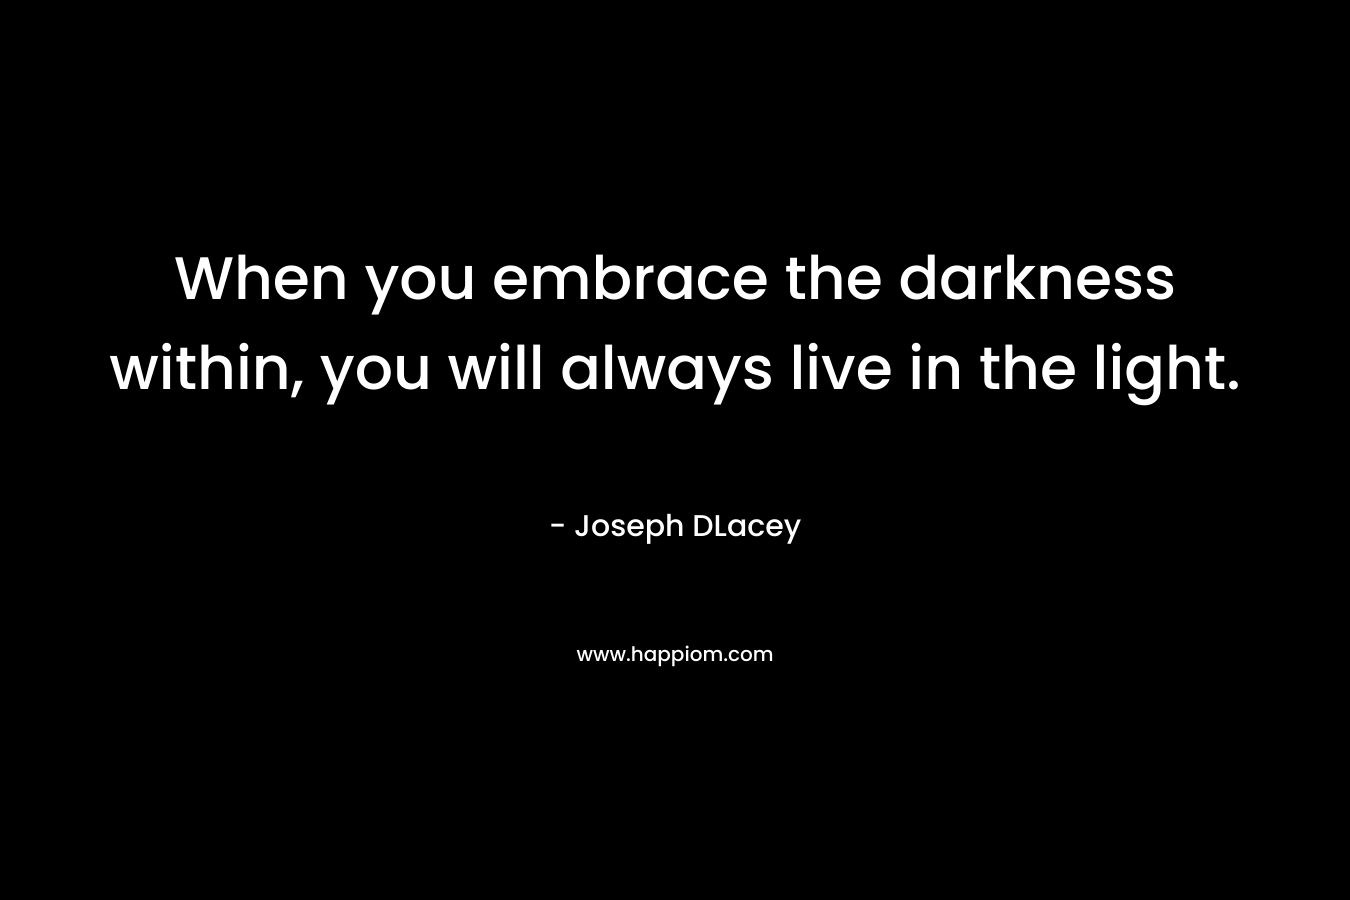 When you embrace the darkness within, you will always live in the light. – Joseph DLacey